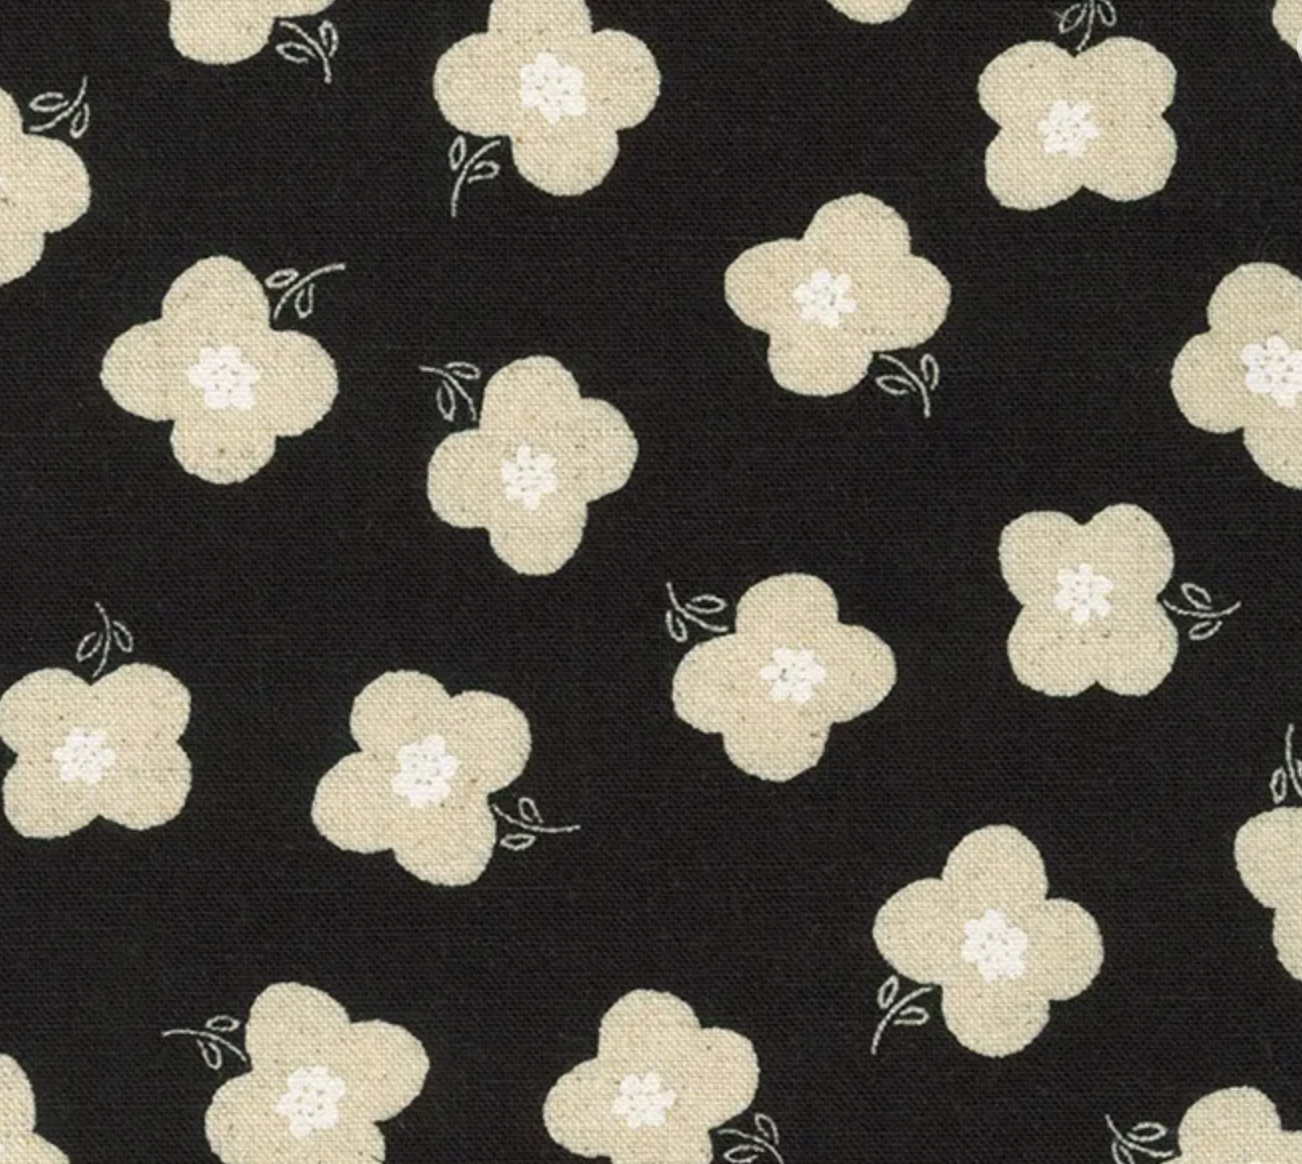 SALE Kaufman Sevenberry Cotton Flax Prints - Black with Taupe Flowers (sold in 25cm  (10") increments)